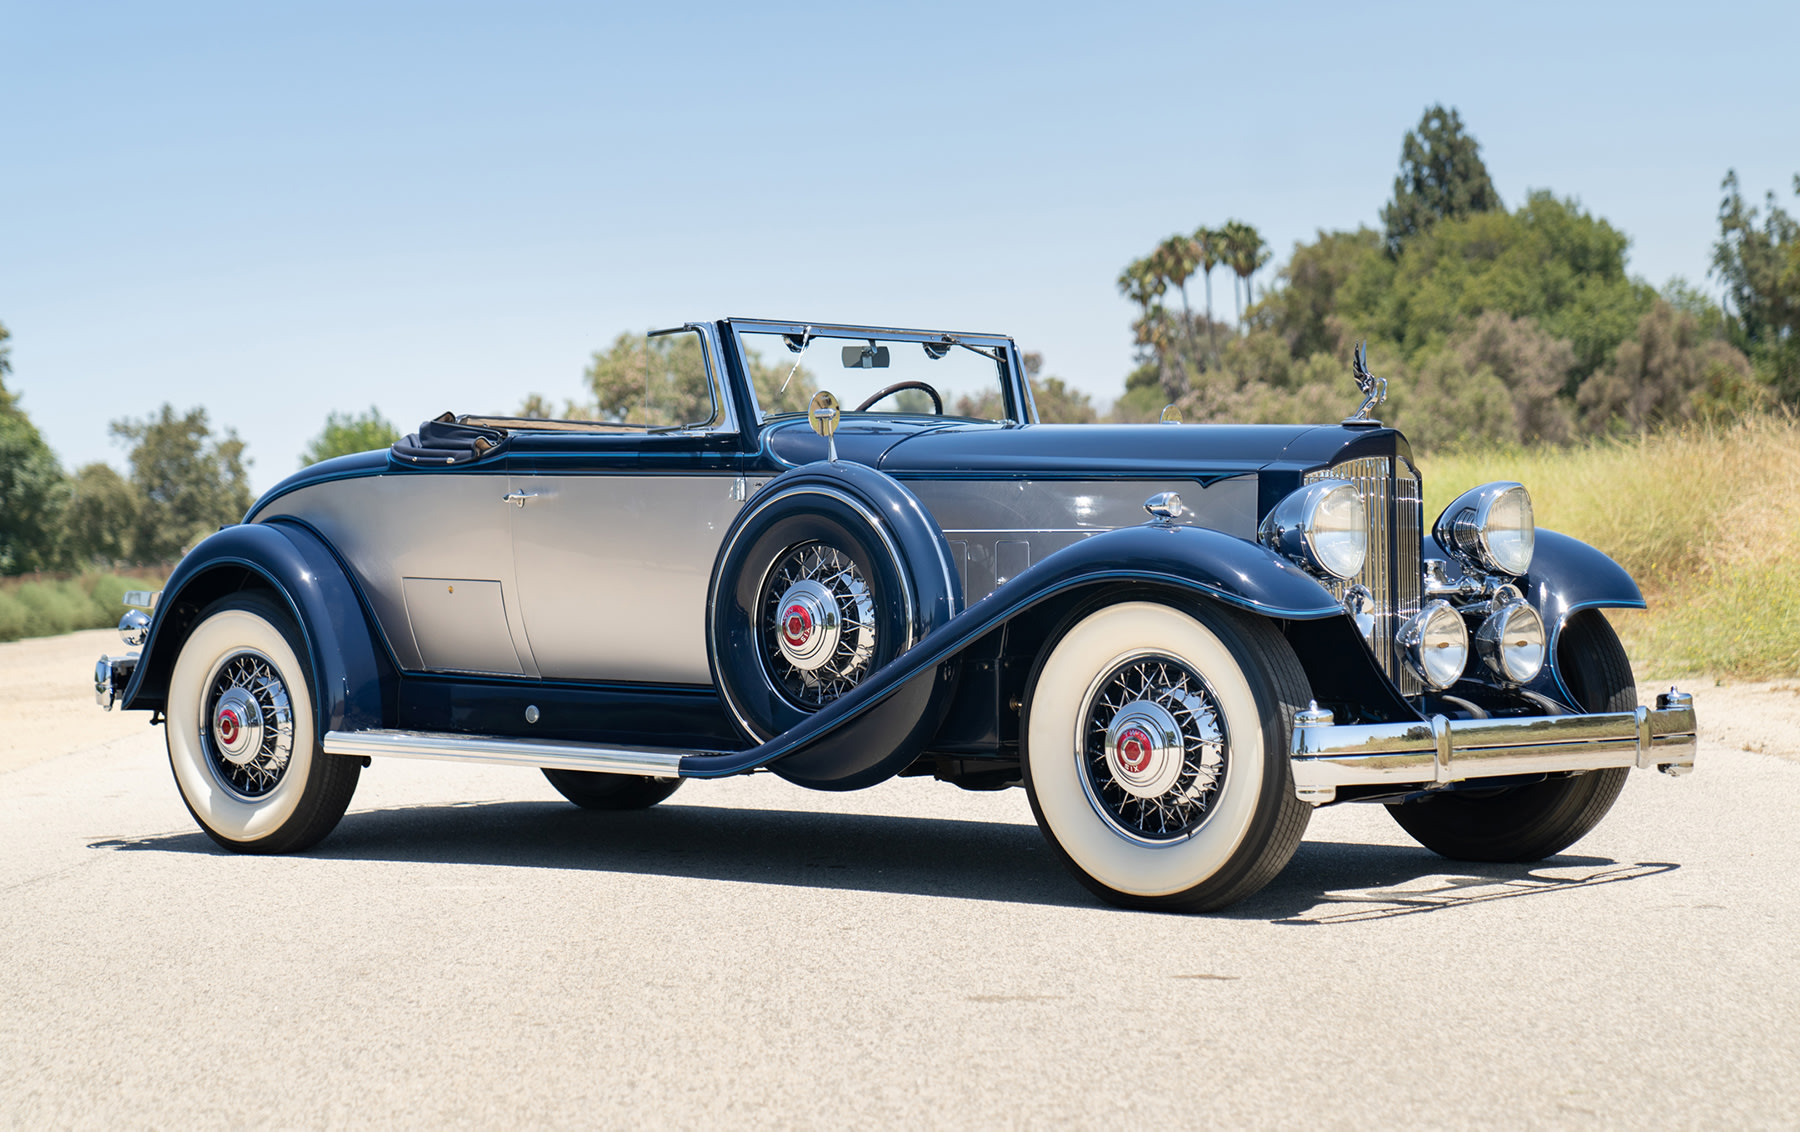 1932 Packard Twin Six 905 Coupe Roadster (PB22)